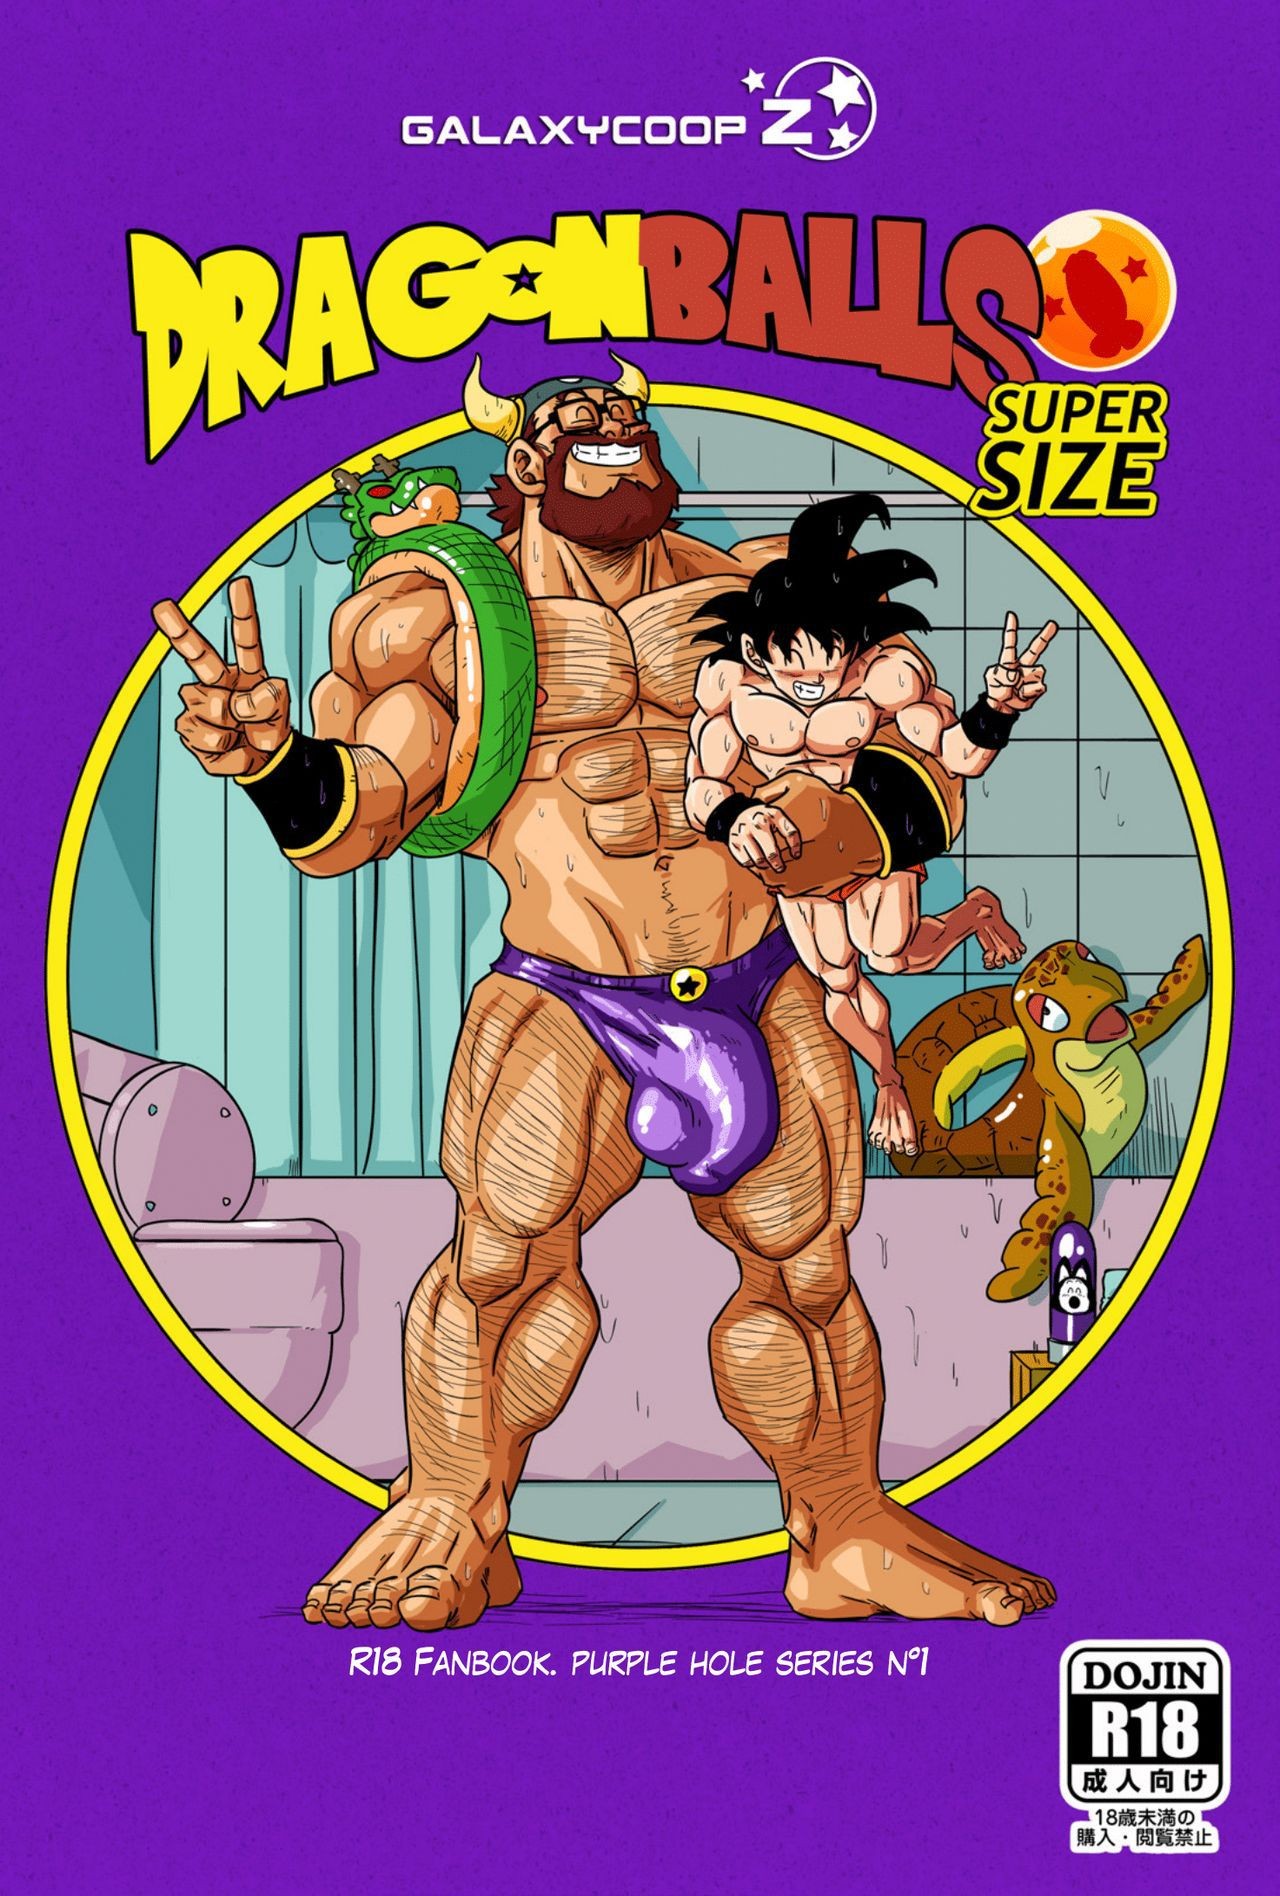 Foreplay Dragon Balls SUPER SIZED (Chapter 01) Asia